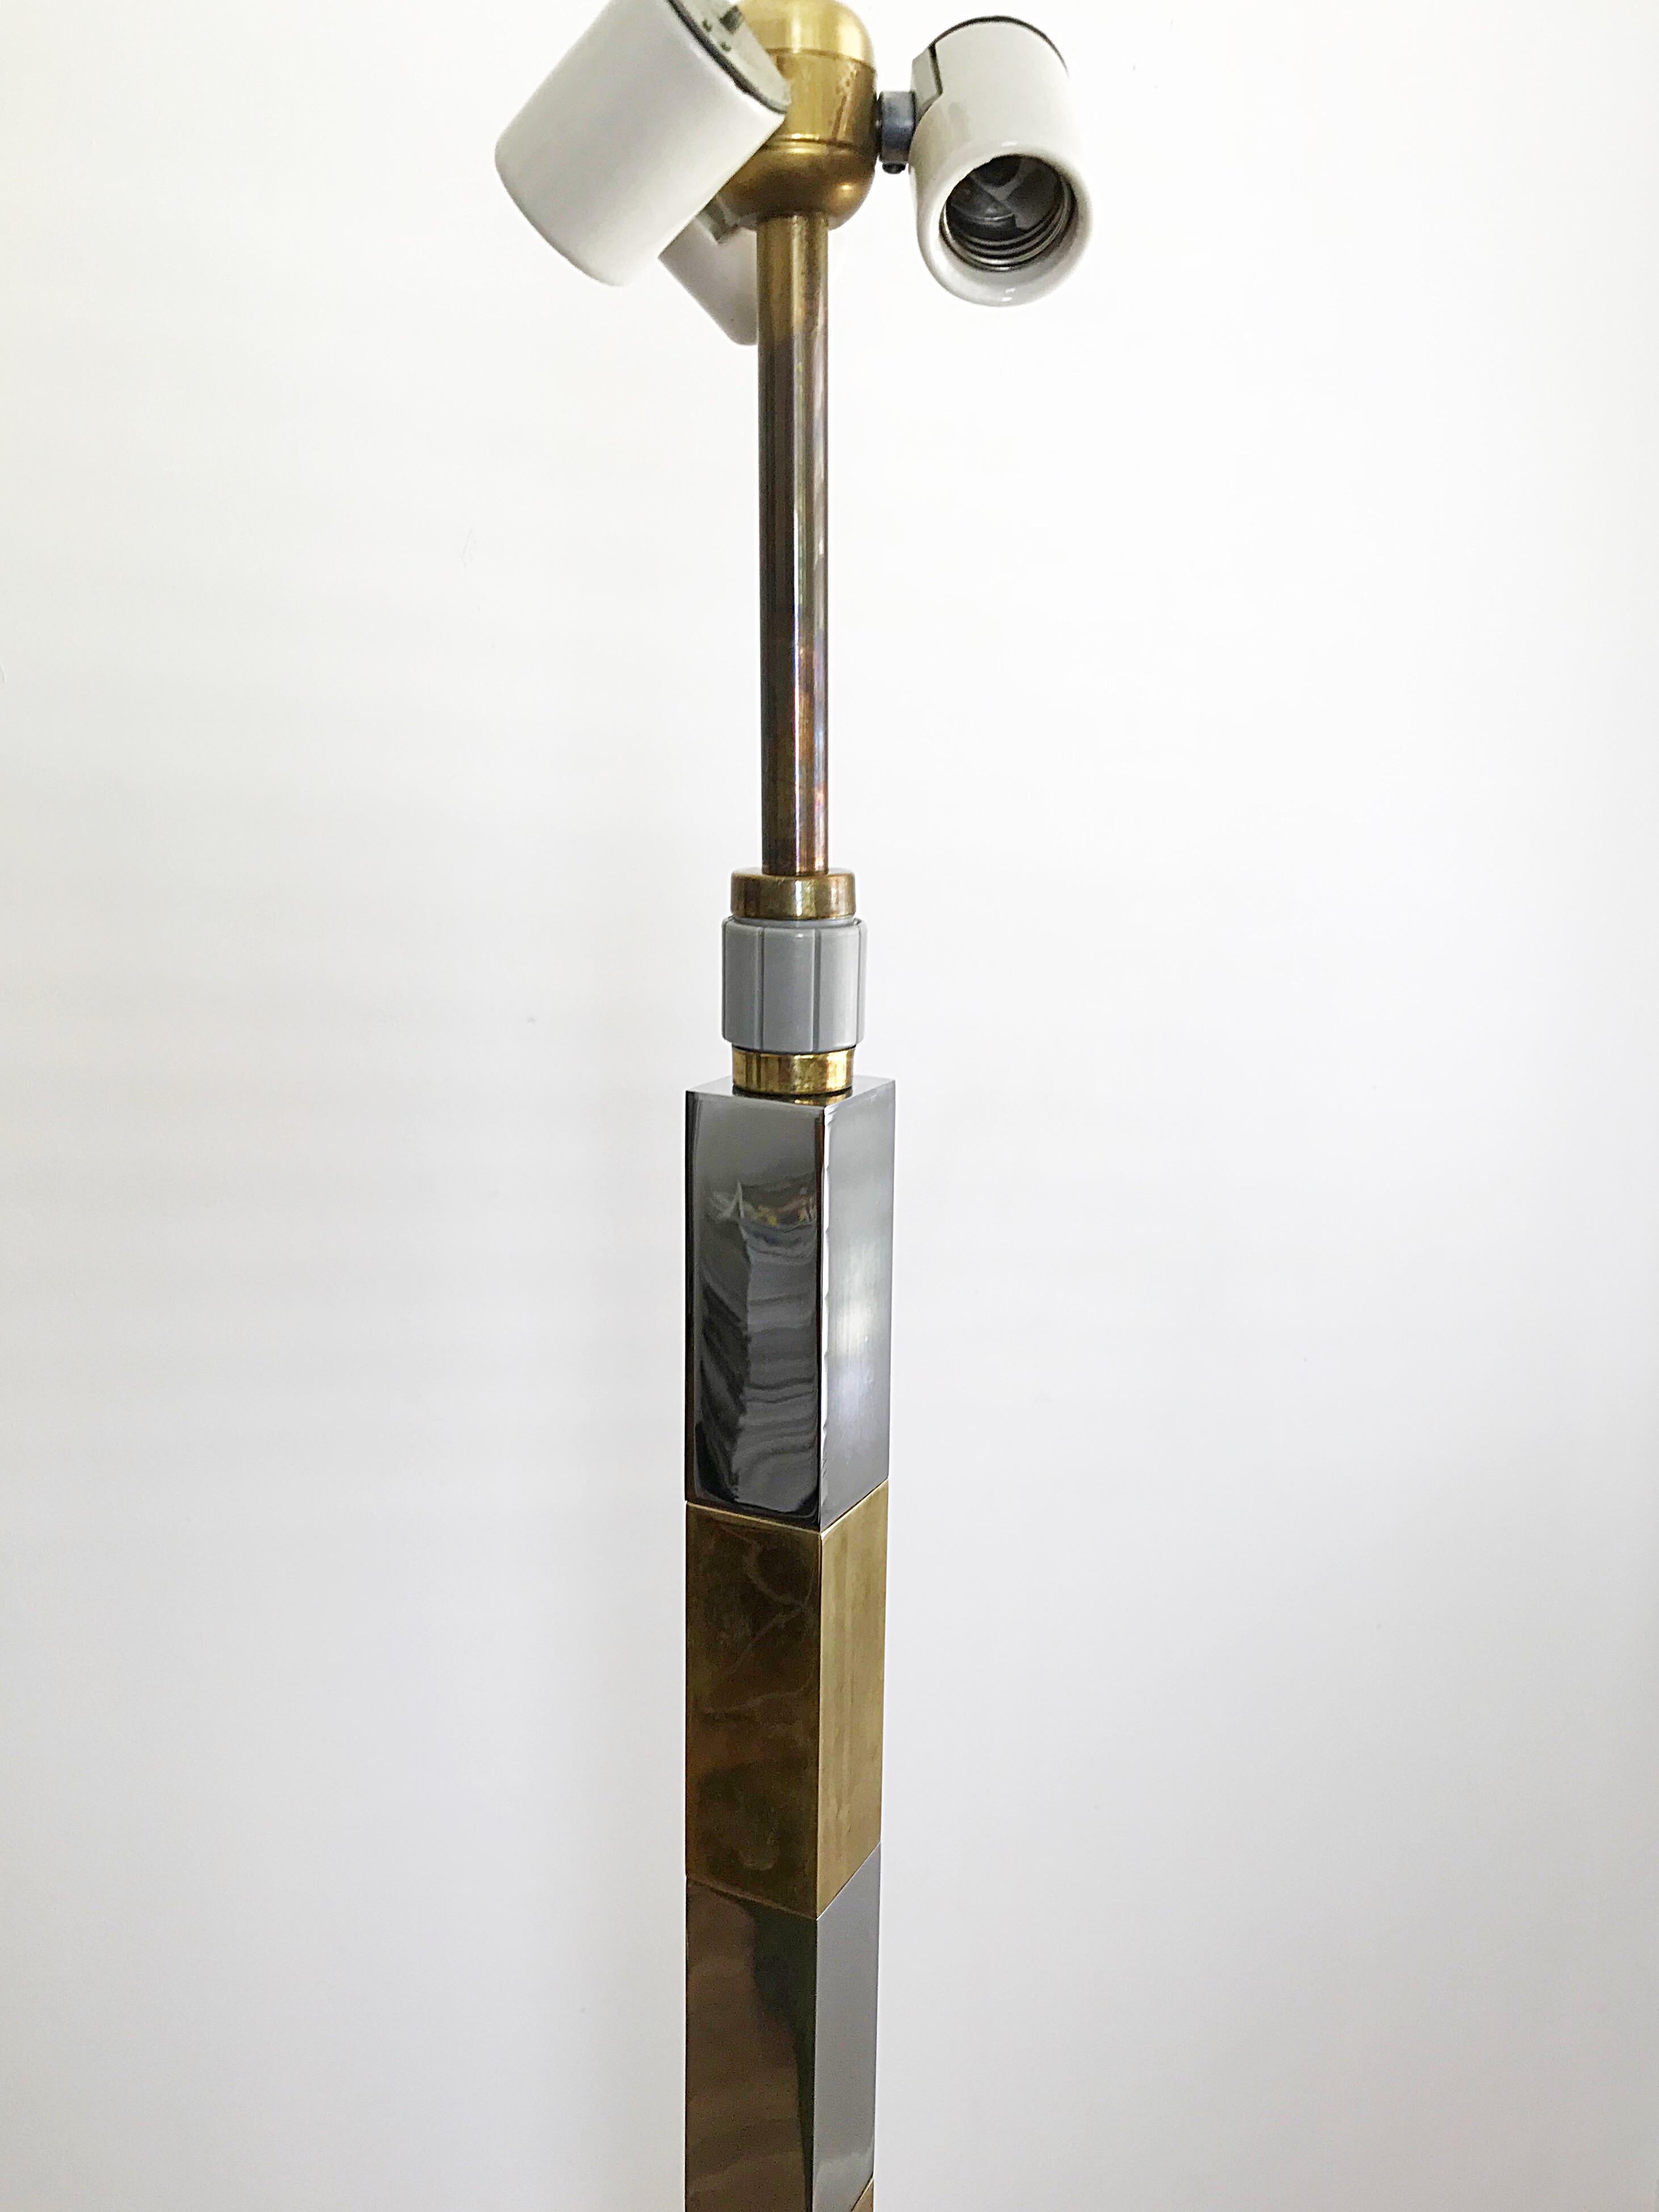 Mid-20th Century Vintage Hansen Lamps, Stewart Ross James, Brass and Chome Floor Lamp For Sale